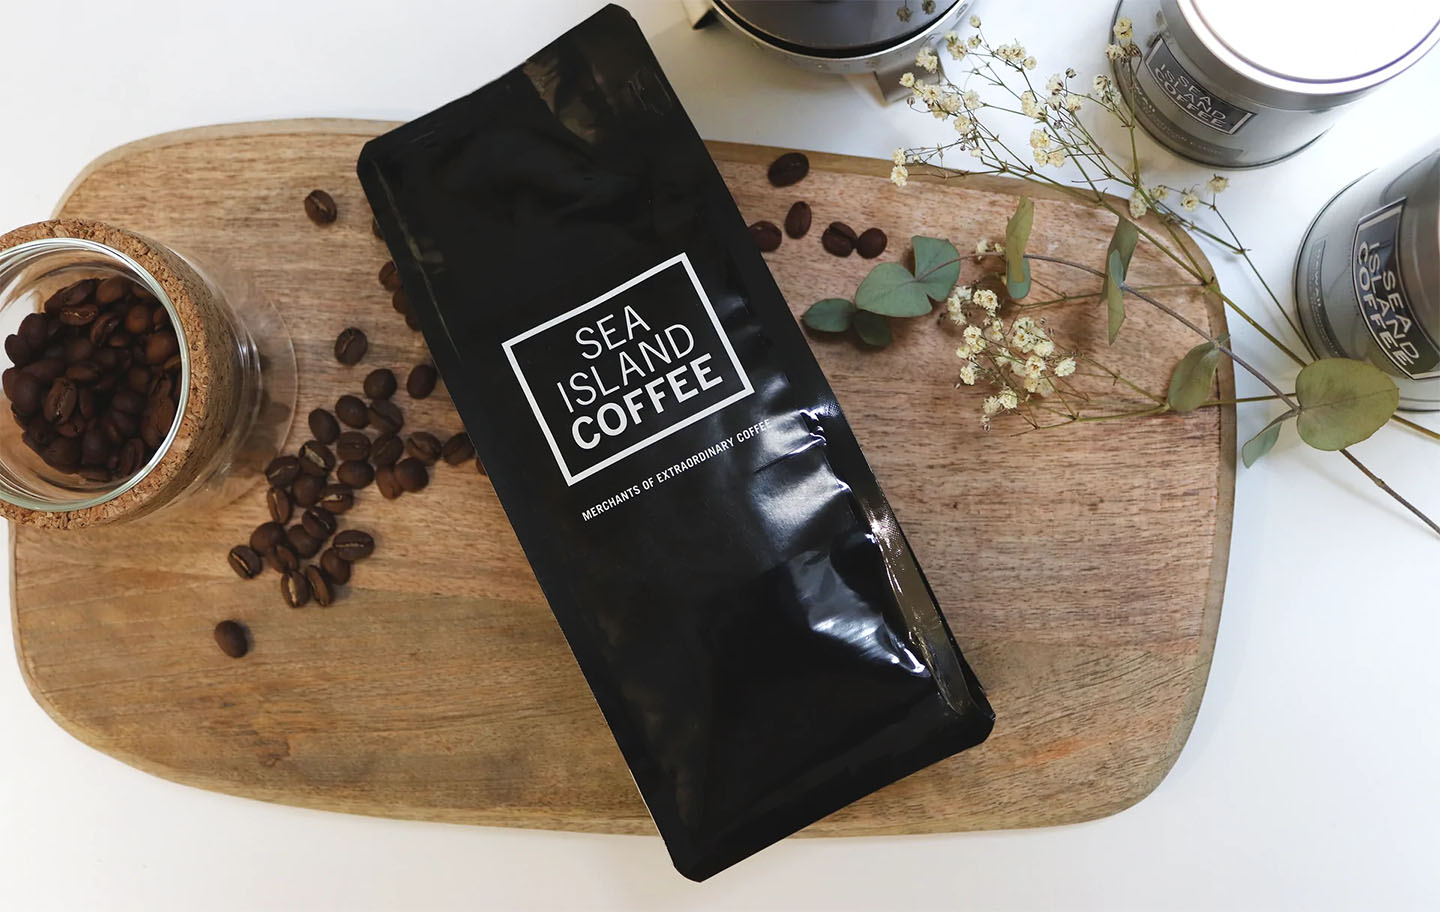 A bag of coffee beans with some flowers, laying across a copping board